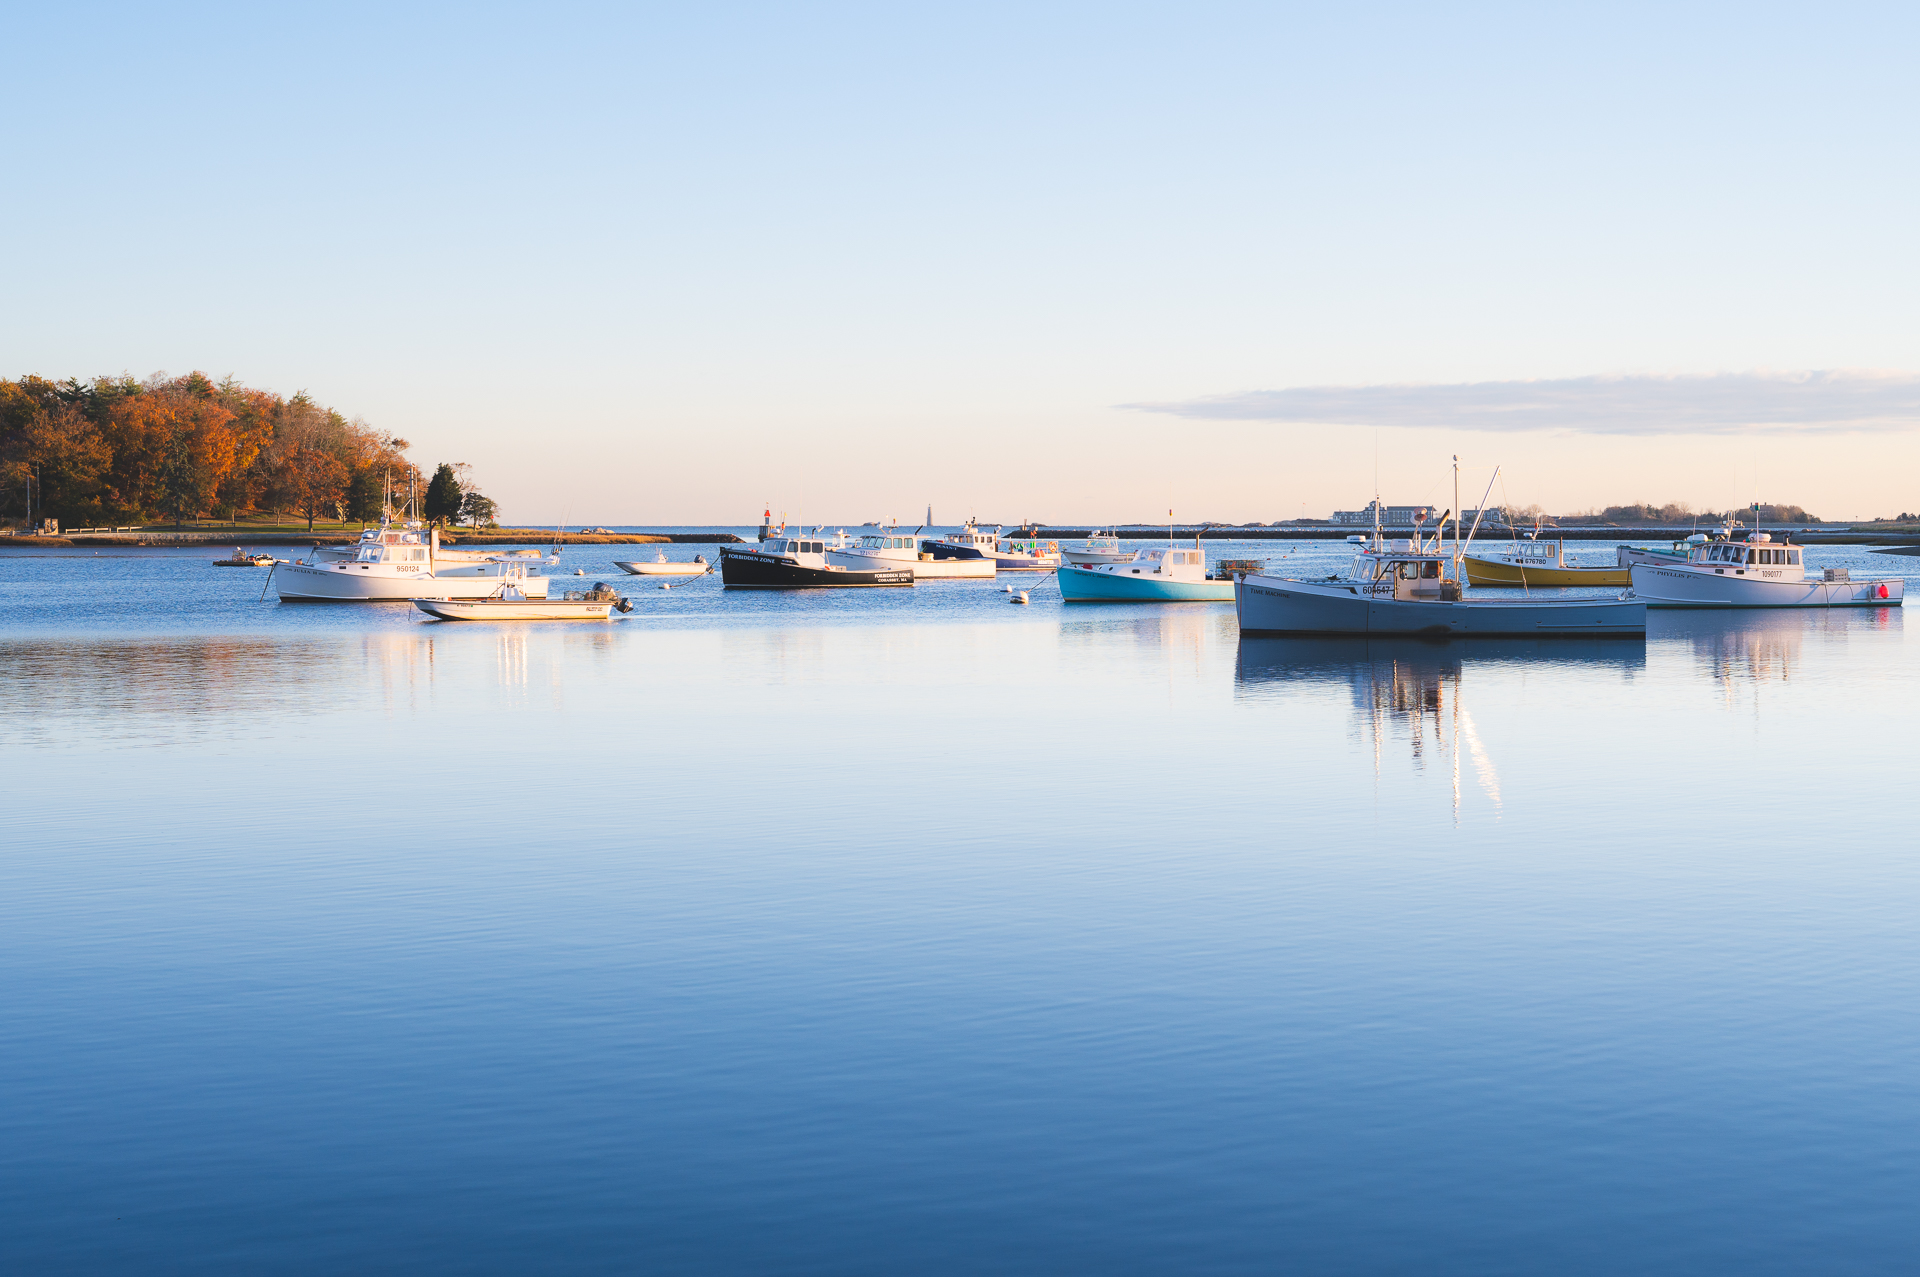 Boats in the water at Cohasset Cove